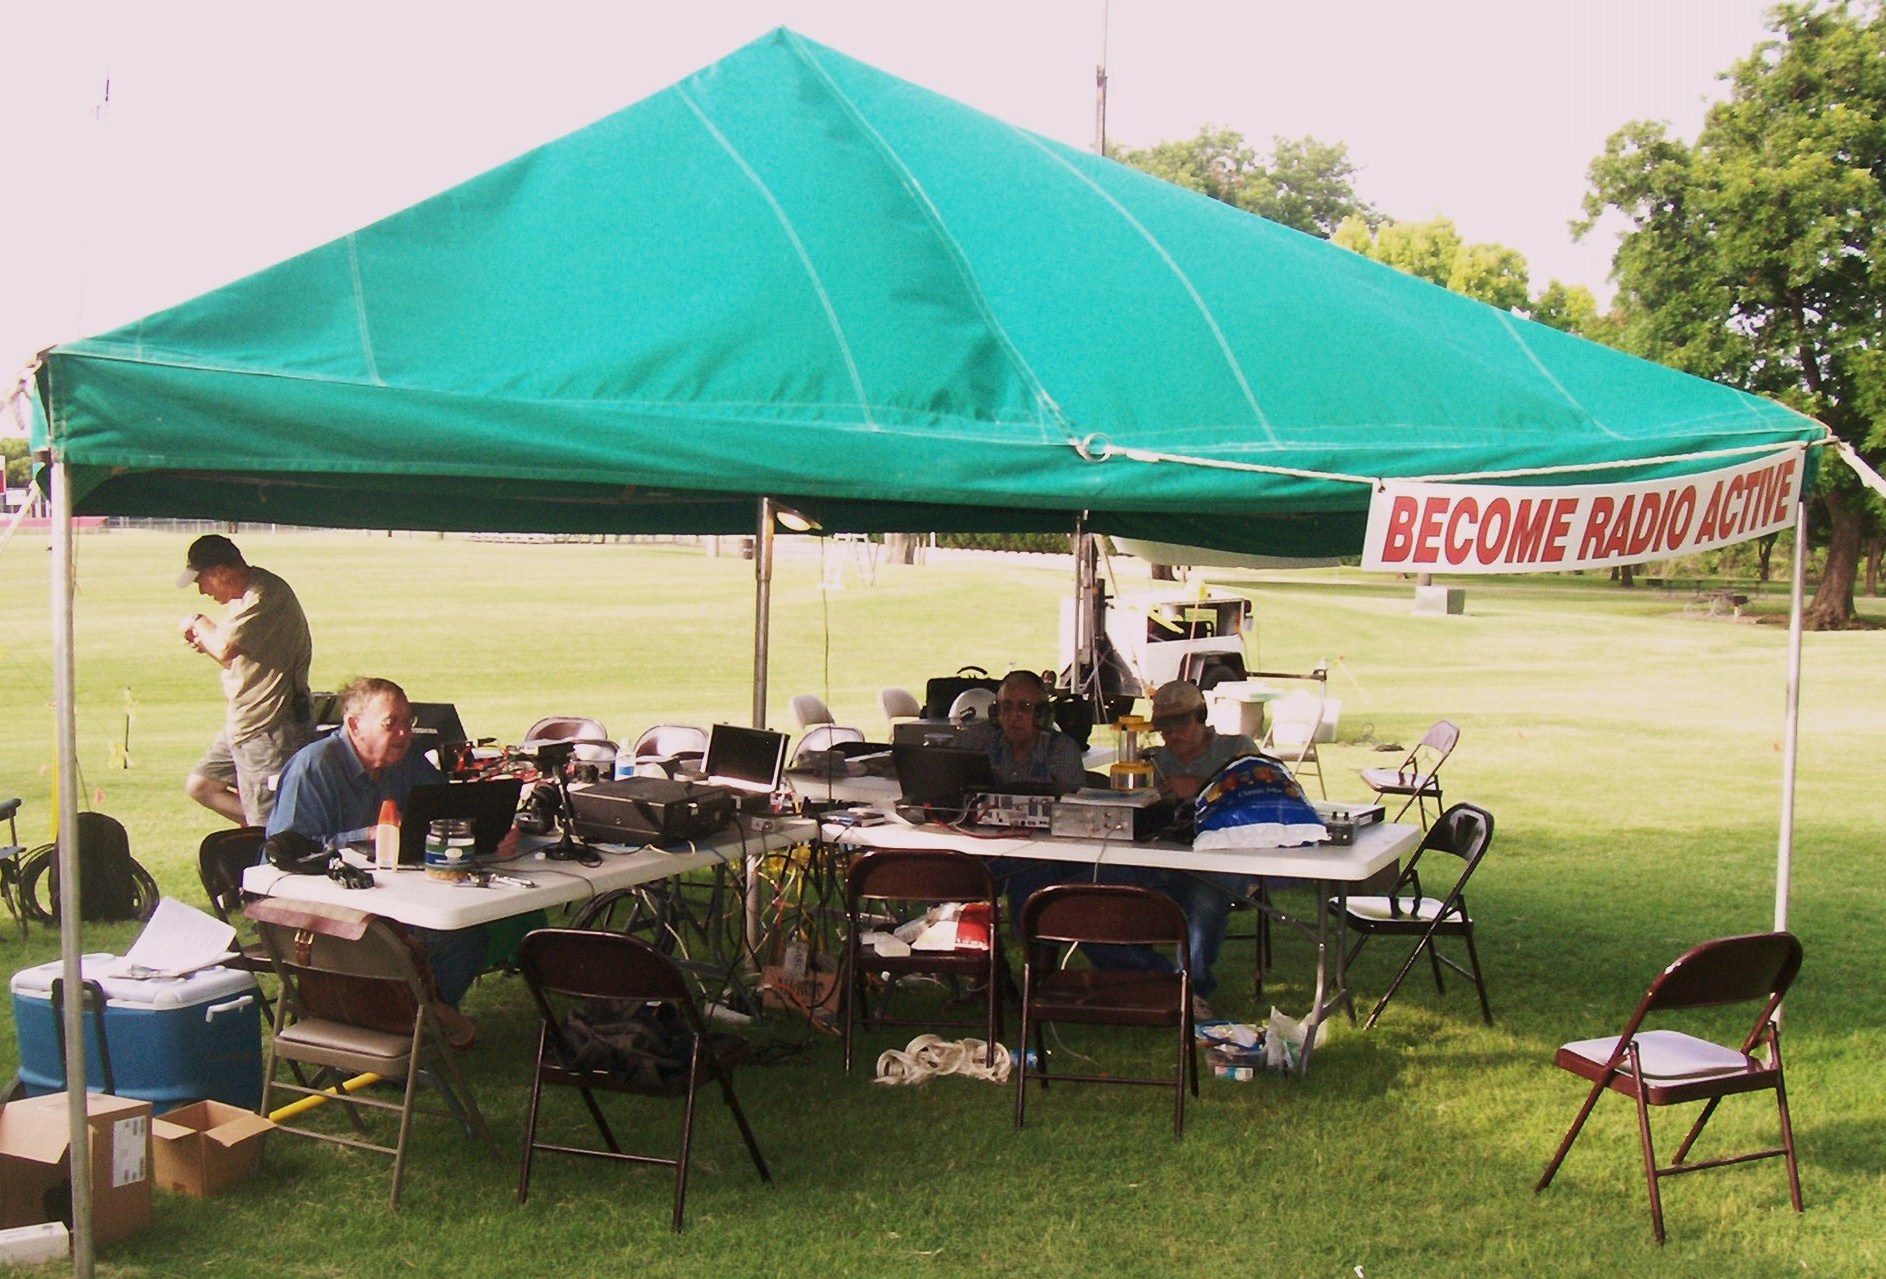 The Communications Tent